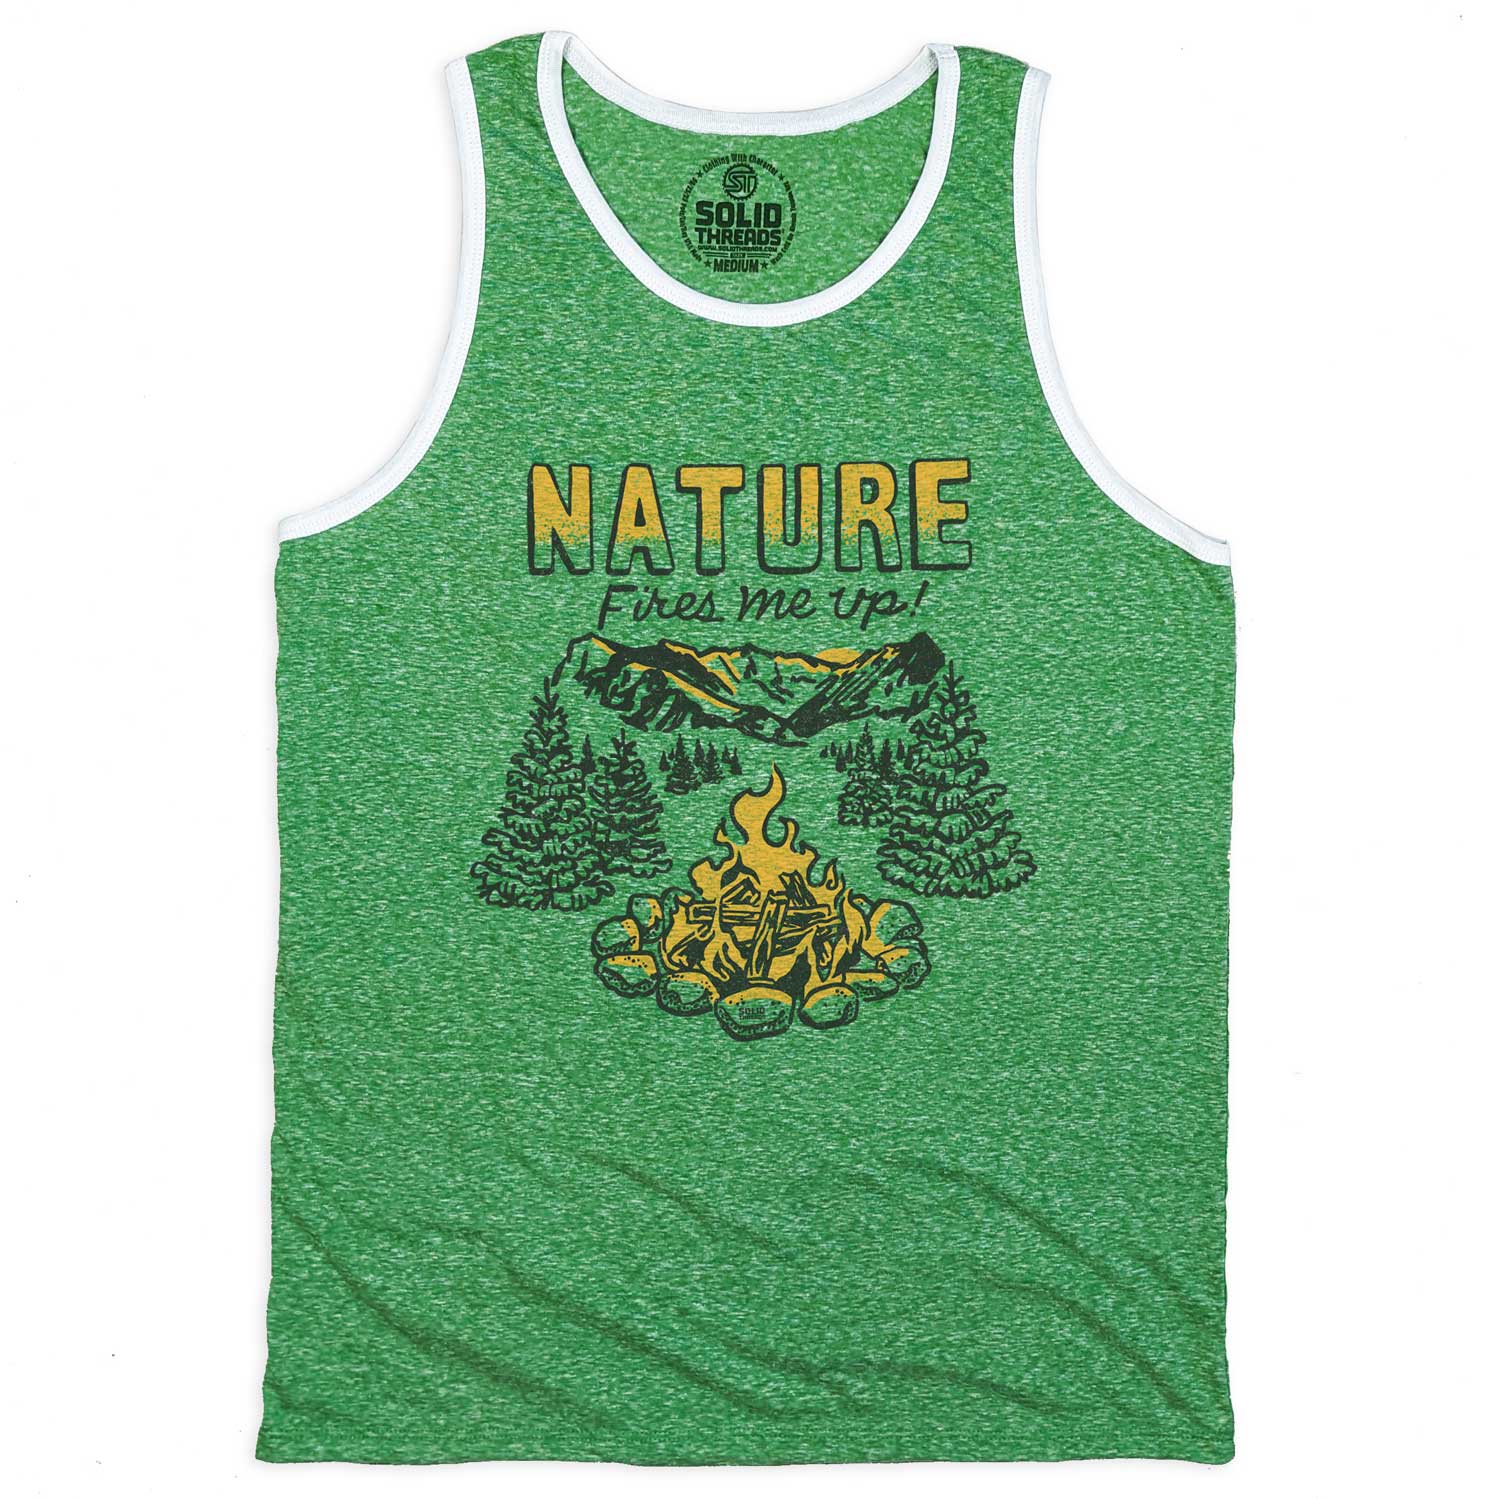 Men's Nature Fires Me Up Vintage Graphic Tank Top | Retro Camping T-shirt | Solid Threads